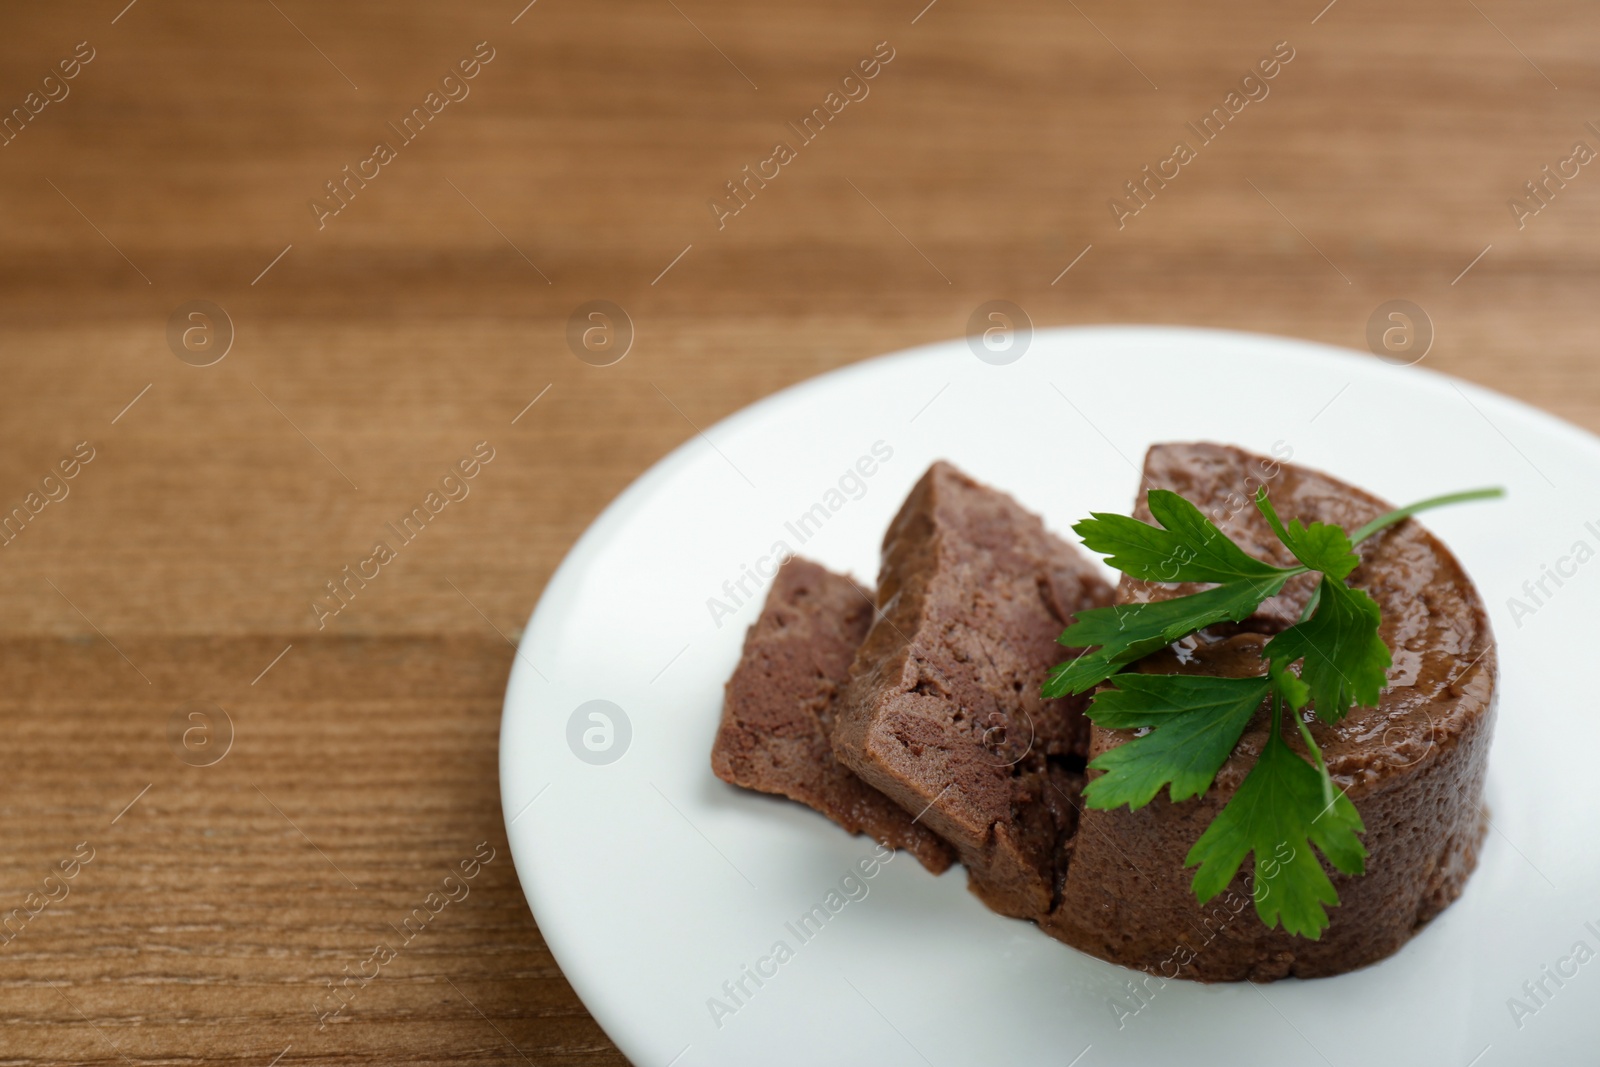 Photo of Plate with pate and parsley on wooden table. Pet food